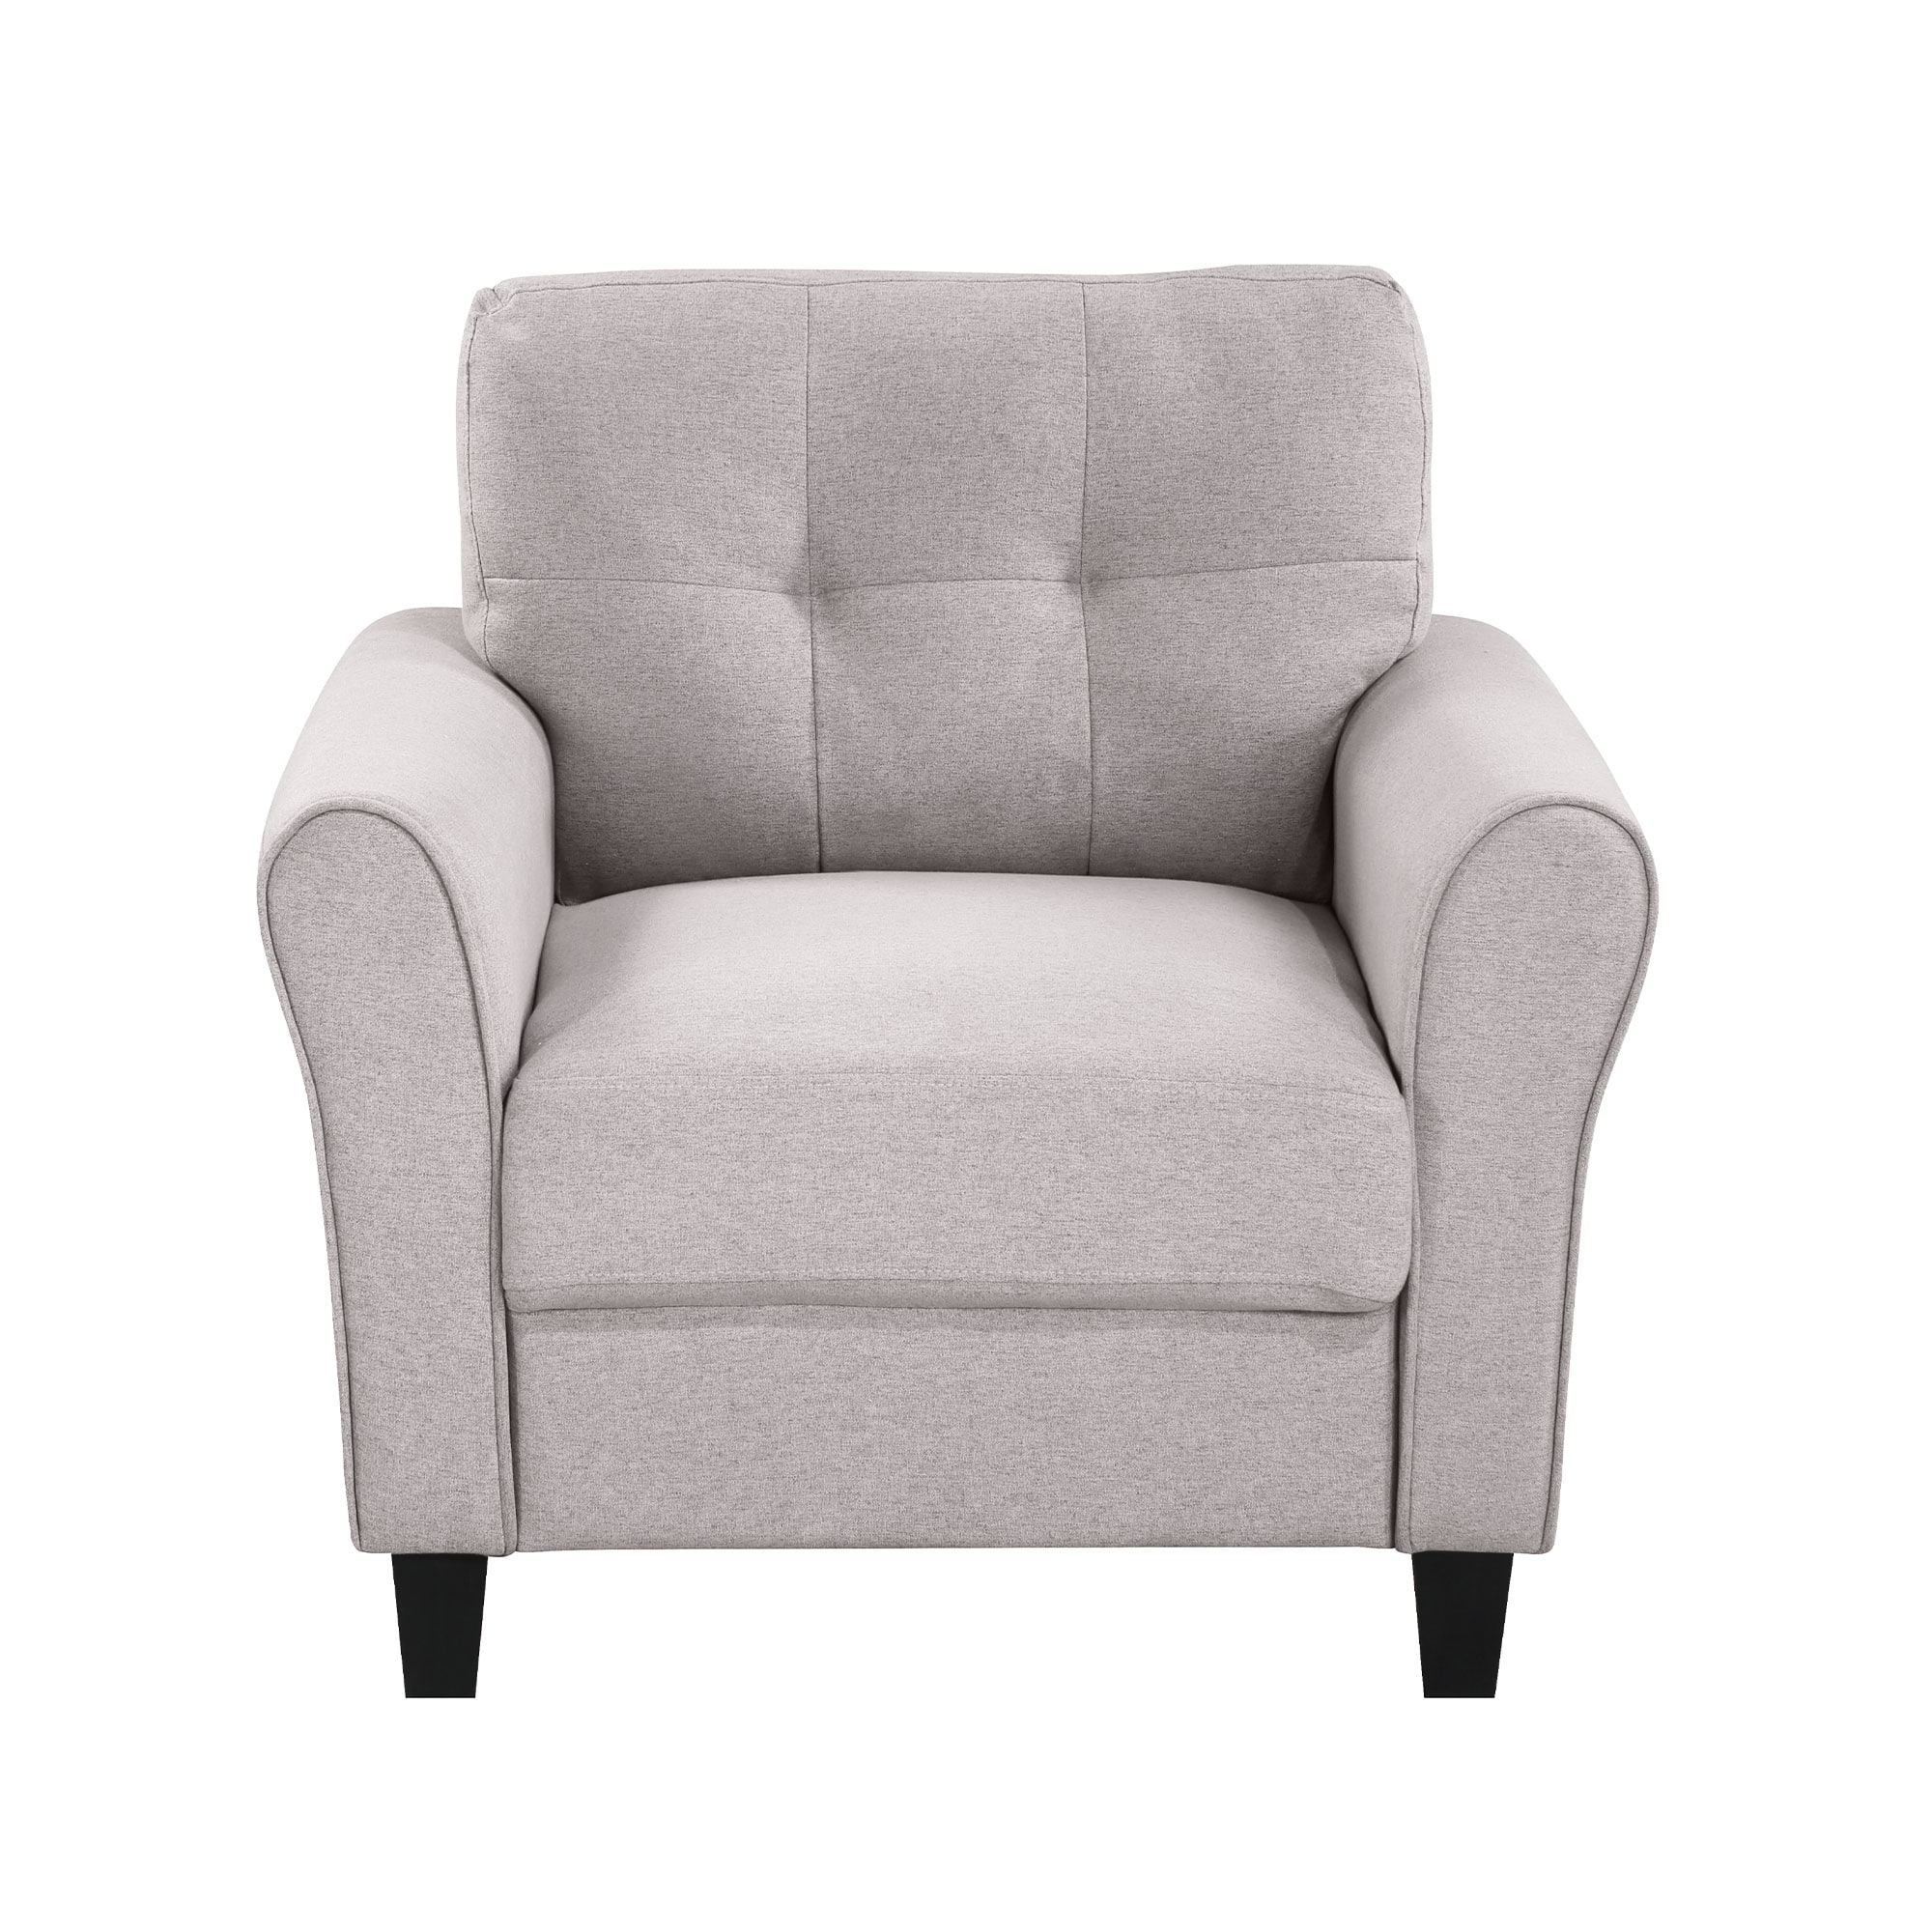 1 Seat Modern Accent Living Room Armchair Linen Upholstered Couch Furniture with Wood Frame & Durable Legs for Home or Office